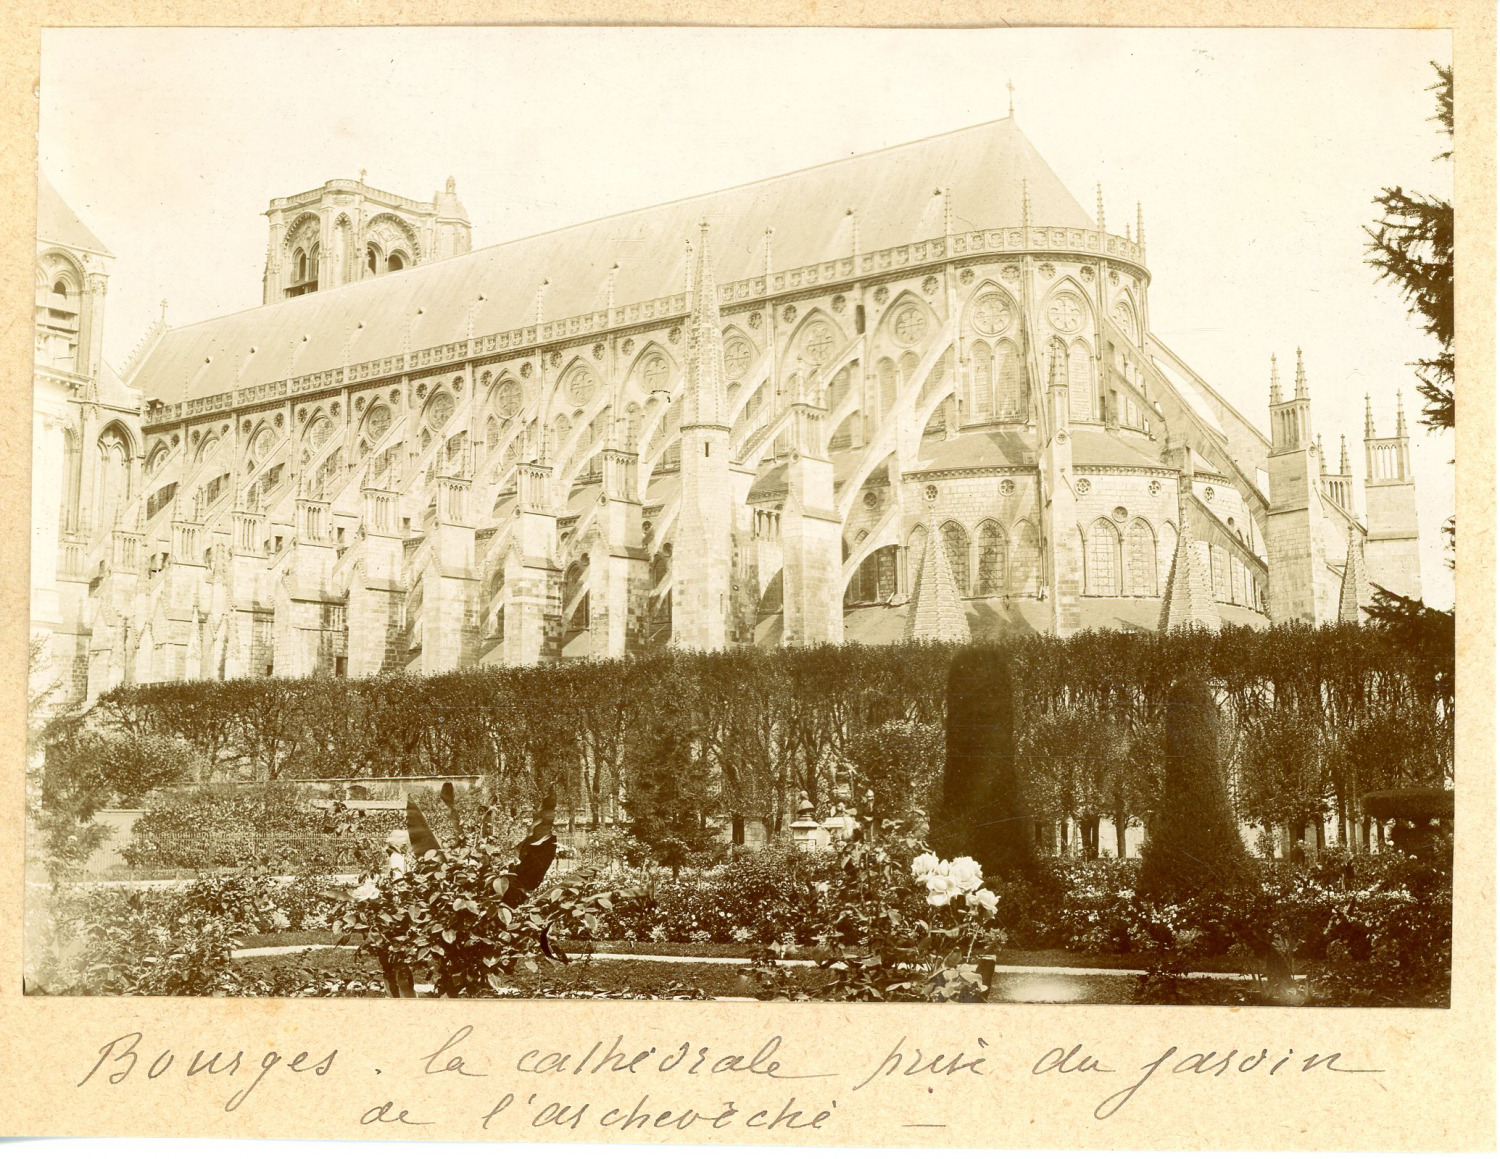 France, Bourges, cathedral taken from the garden, archdiocese vintage albumen print, 